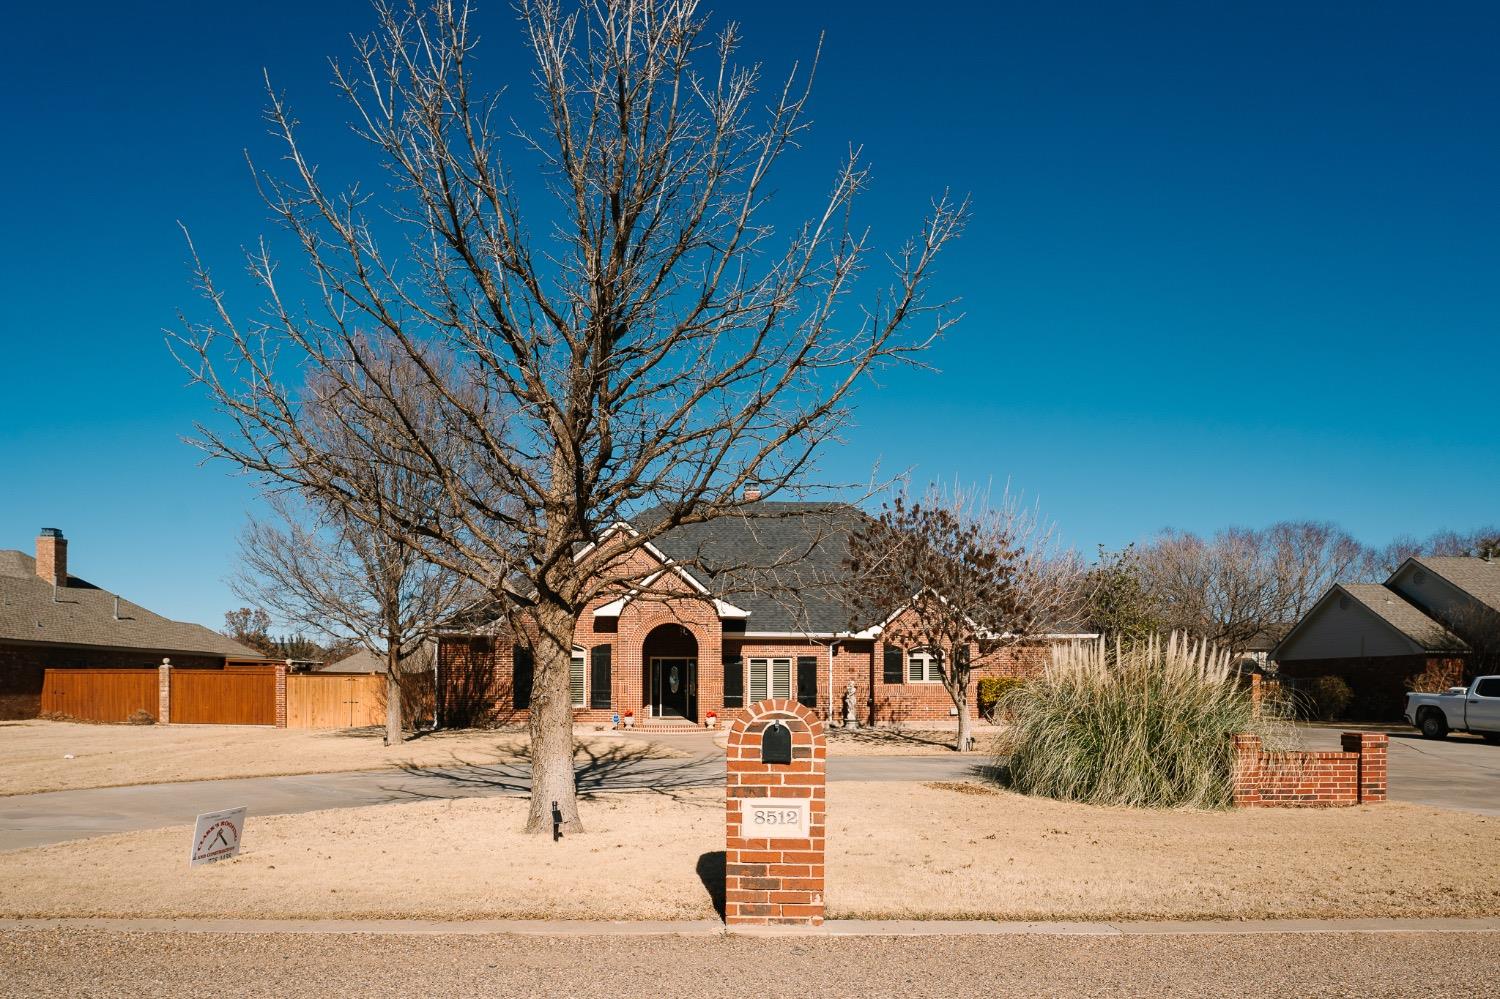 Kick off the new year in this extraordinary 4/3.5/3 home with a HUGE 24' X 20' shop sitting on .5 acres in Llano Estates! This home has entertaining written all over it. You will quickly see yourself enjoying the spacious outdoor living area, the underground self cleaning pool and hot tub, large basement, and the two living areas each with a fireplace. The well equipped kitchen offers a large breakfast island, double oven, and a spacious pantry. Bedrooms include a large master suite, tucked away guest suite, two bedrooms joined by a Jack n Jill bathroom. Recent updates include a new roof on house and shop, new exterior doors, new windows, new exterior shutters, new exterior paint (trim & garage/shop doors), all new ceiling fans and light fixtures, new gutters, new water well pump, new water softener electrical equipment, updated master bathroom, new interior paint, new pump on pool equipment. Located just outside city limits, this